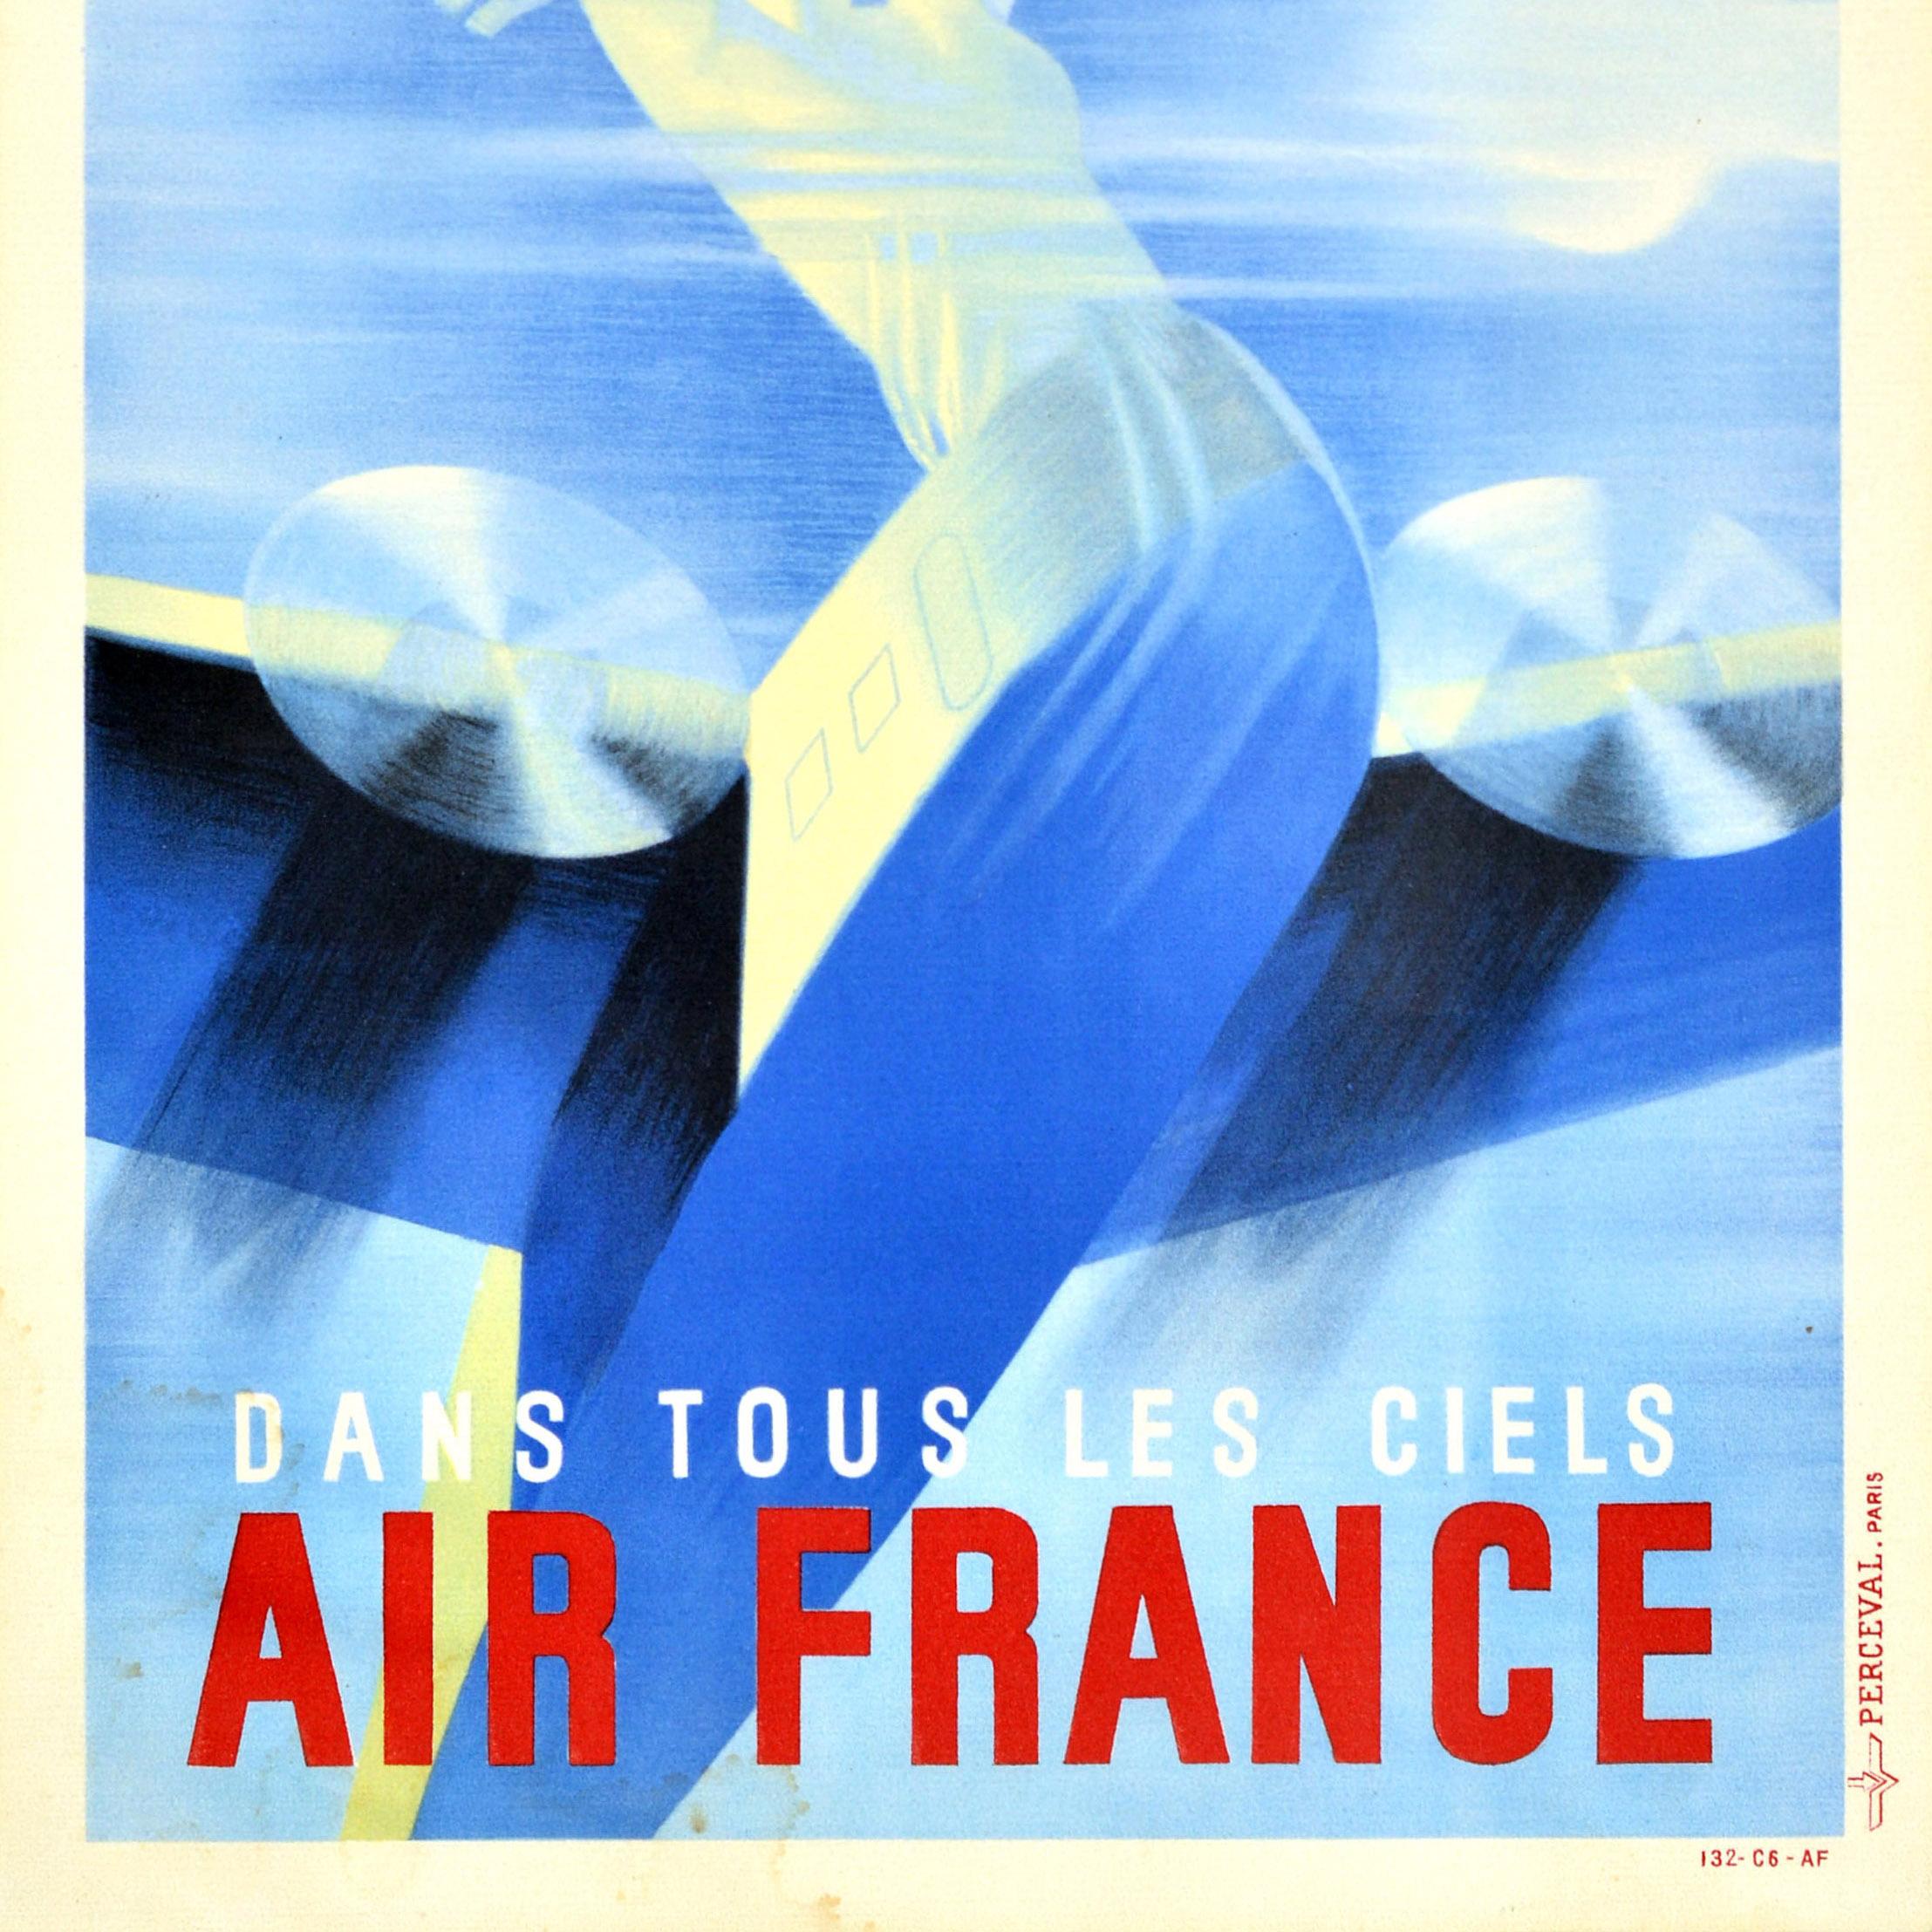 French Original Vintage Travel Poster Air France Airways In All Skies Roger De Valerio For Sale